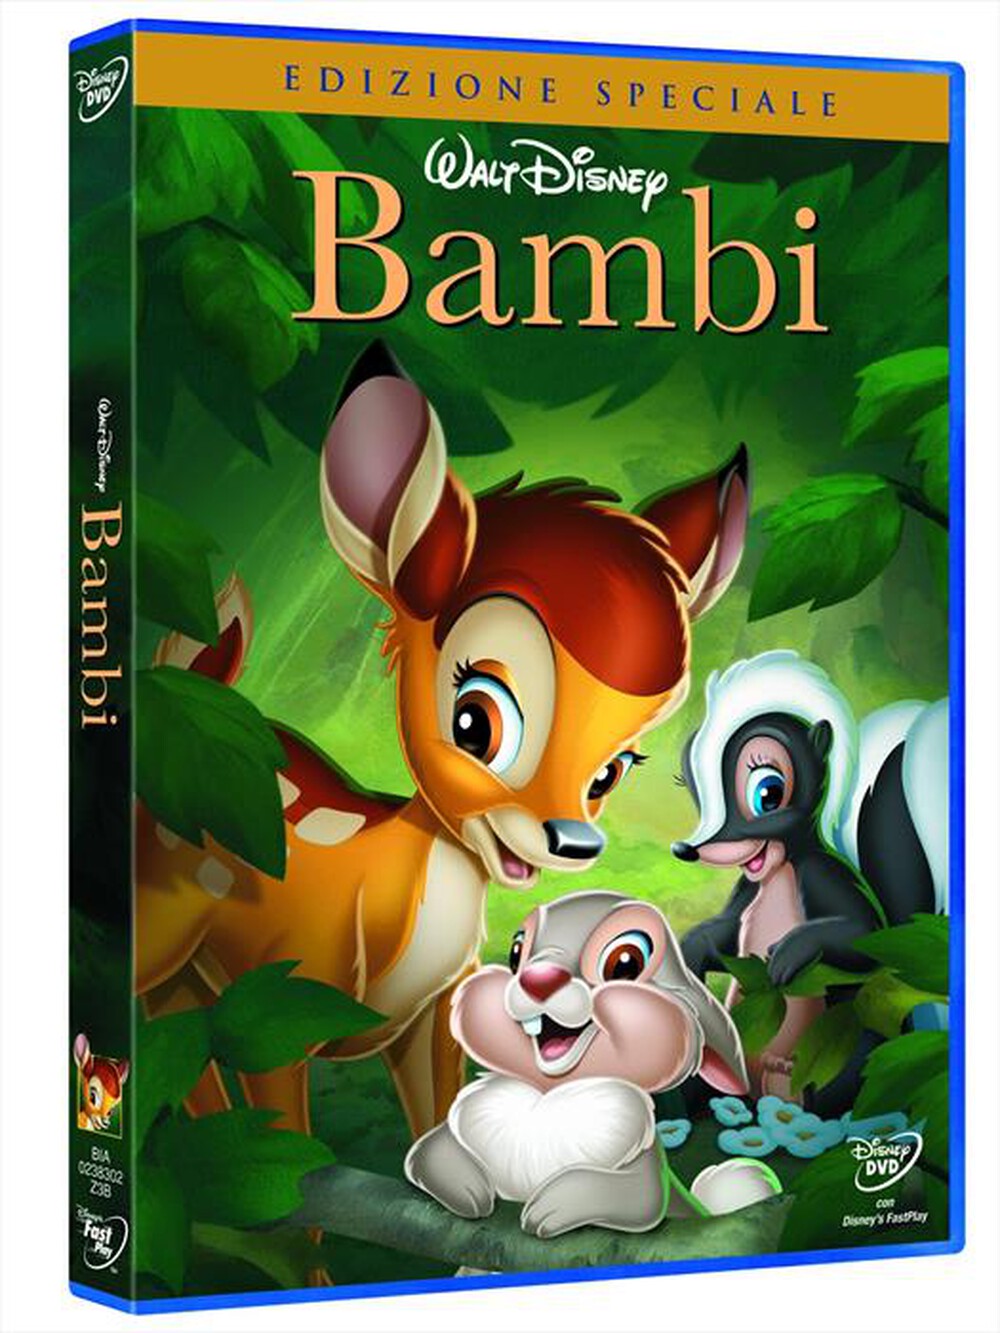 "EAGLE PICTURES - Bambi (SE)"